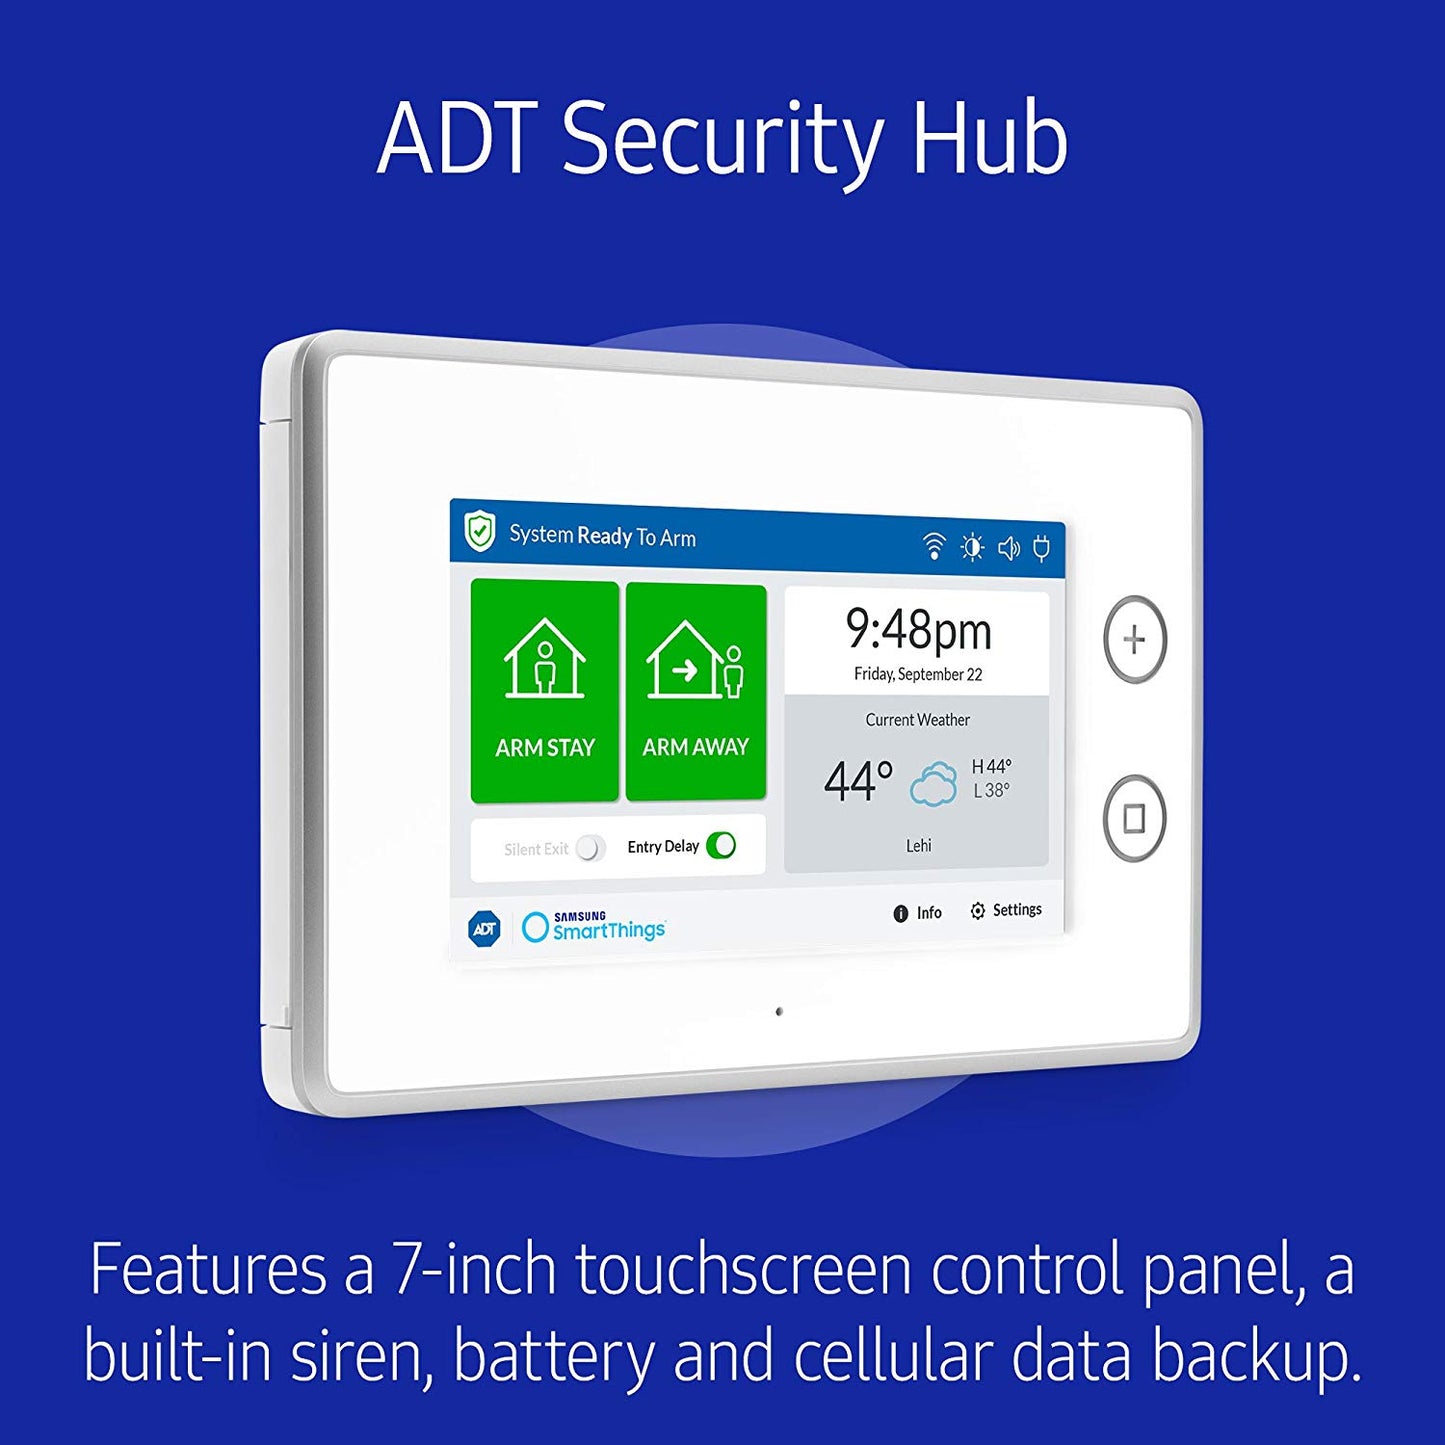 Samsung SmartThings ADT Wireless Home Security Starter Kit with DIY Smart Alarm System Hub